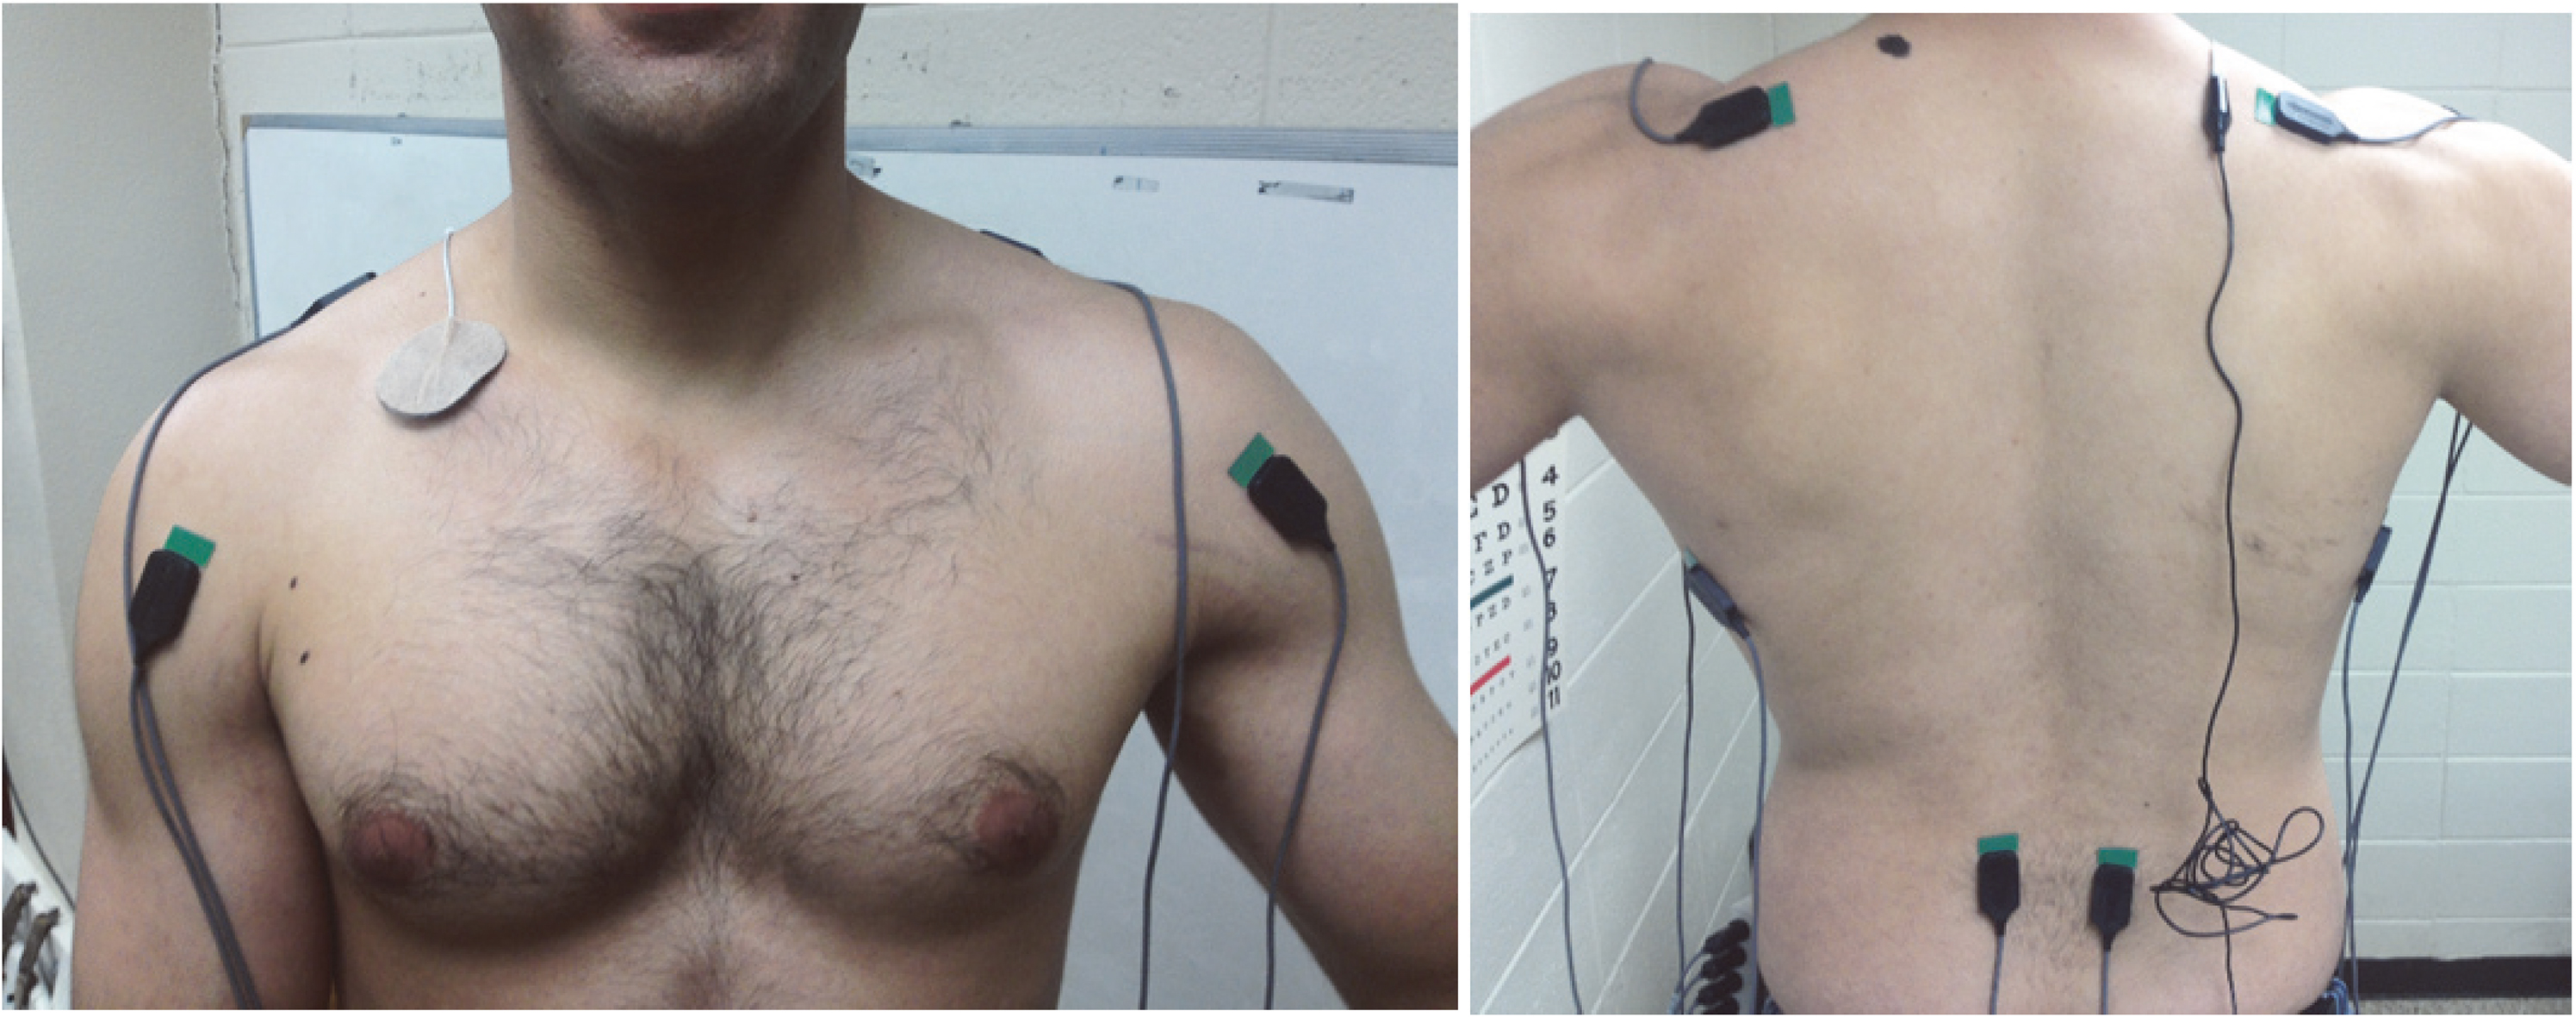 The exact location and positioning of each electrode for the anterior deltoid, trapezius, latissimus dorsi, and erector spinae (Konrad, 2005).